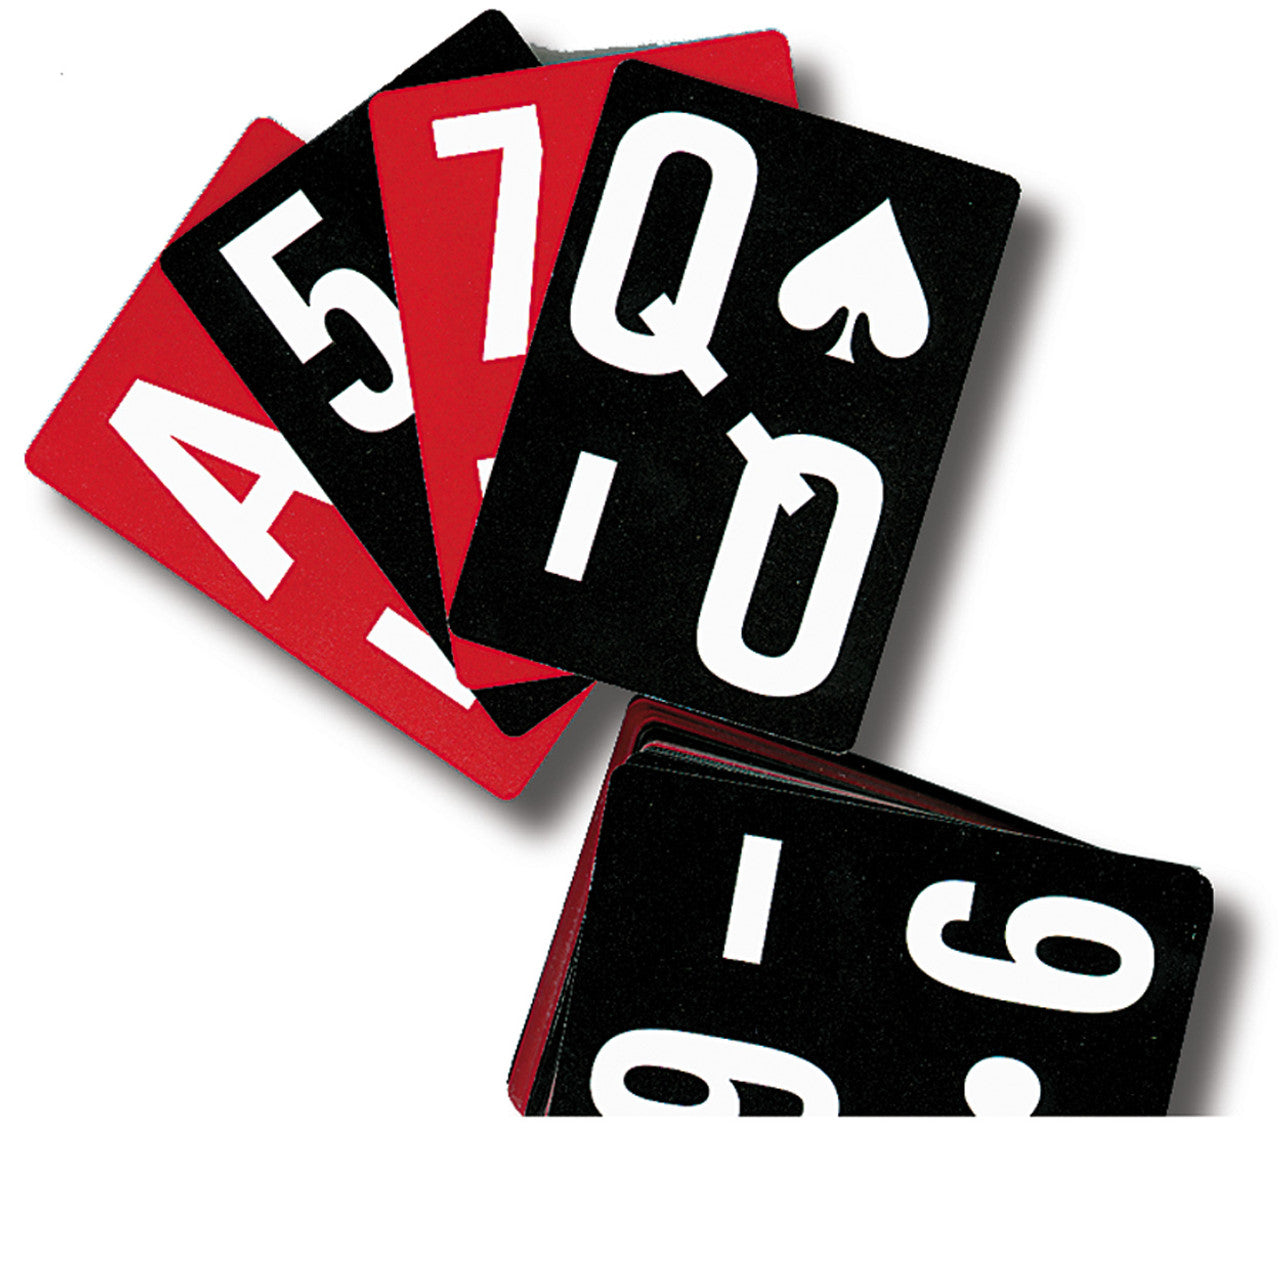 EZC Large Playing Cards with white numbers on a black or red background.